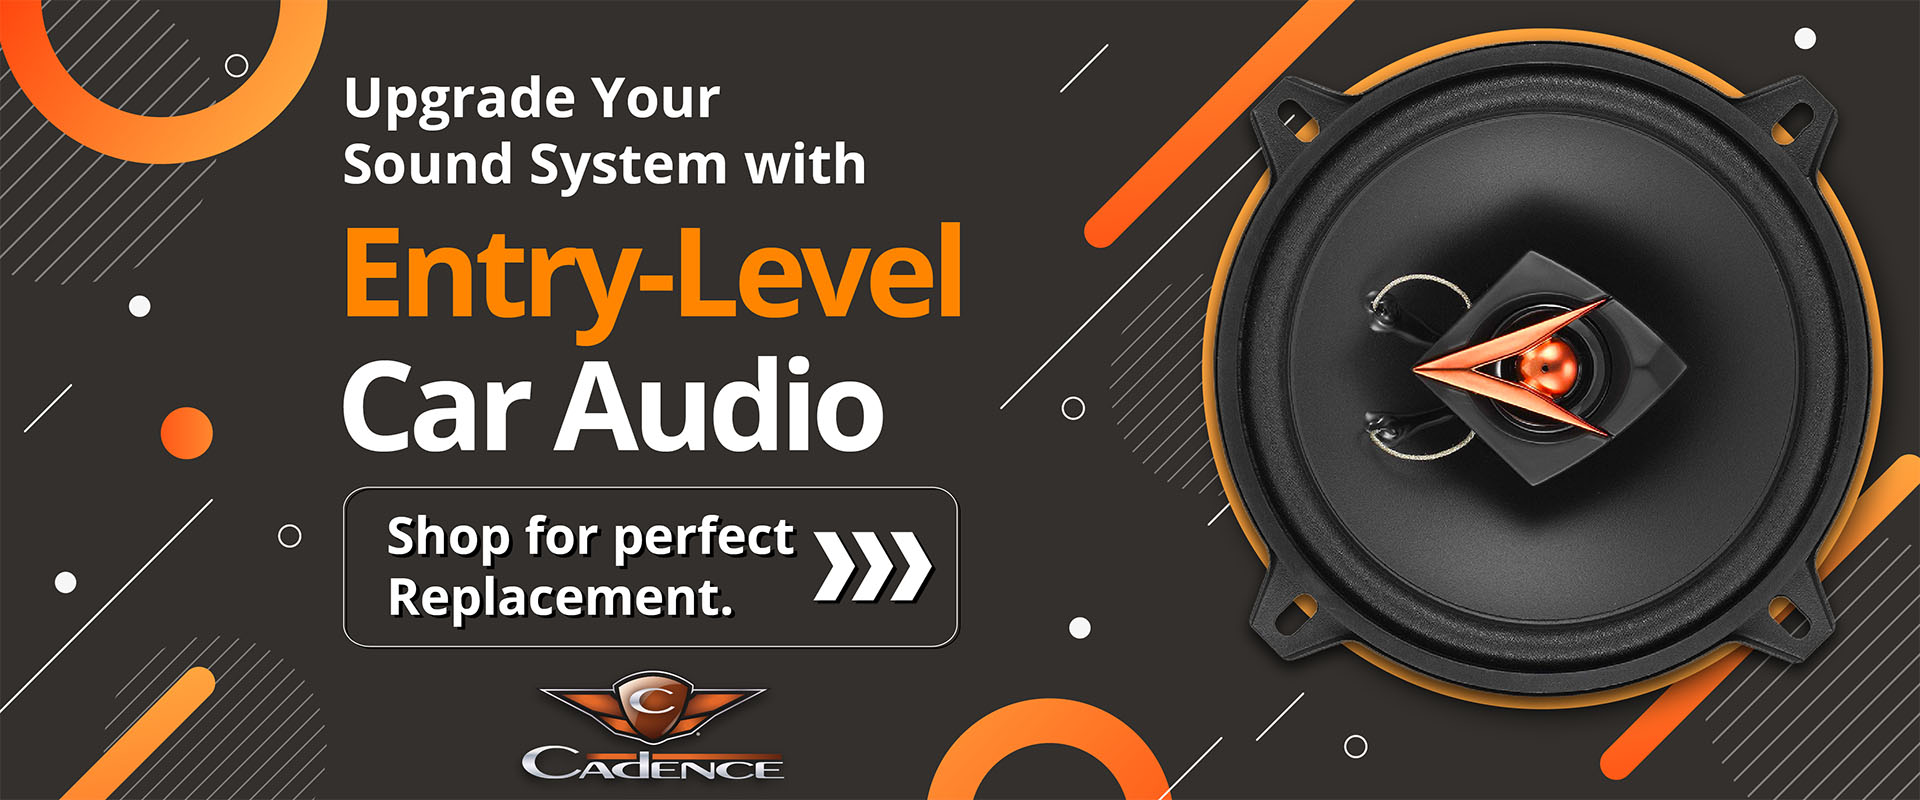 Upgrade Your Sound System with Entry-Level Car Audio Shop for perfect Replacement.